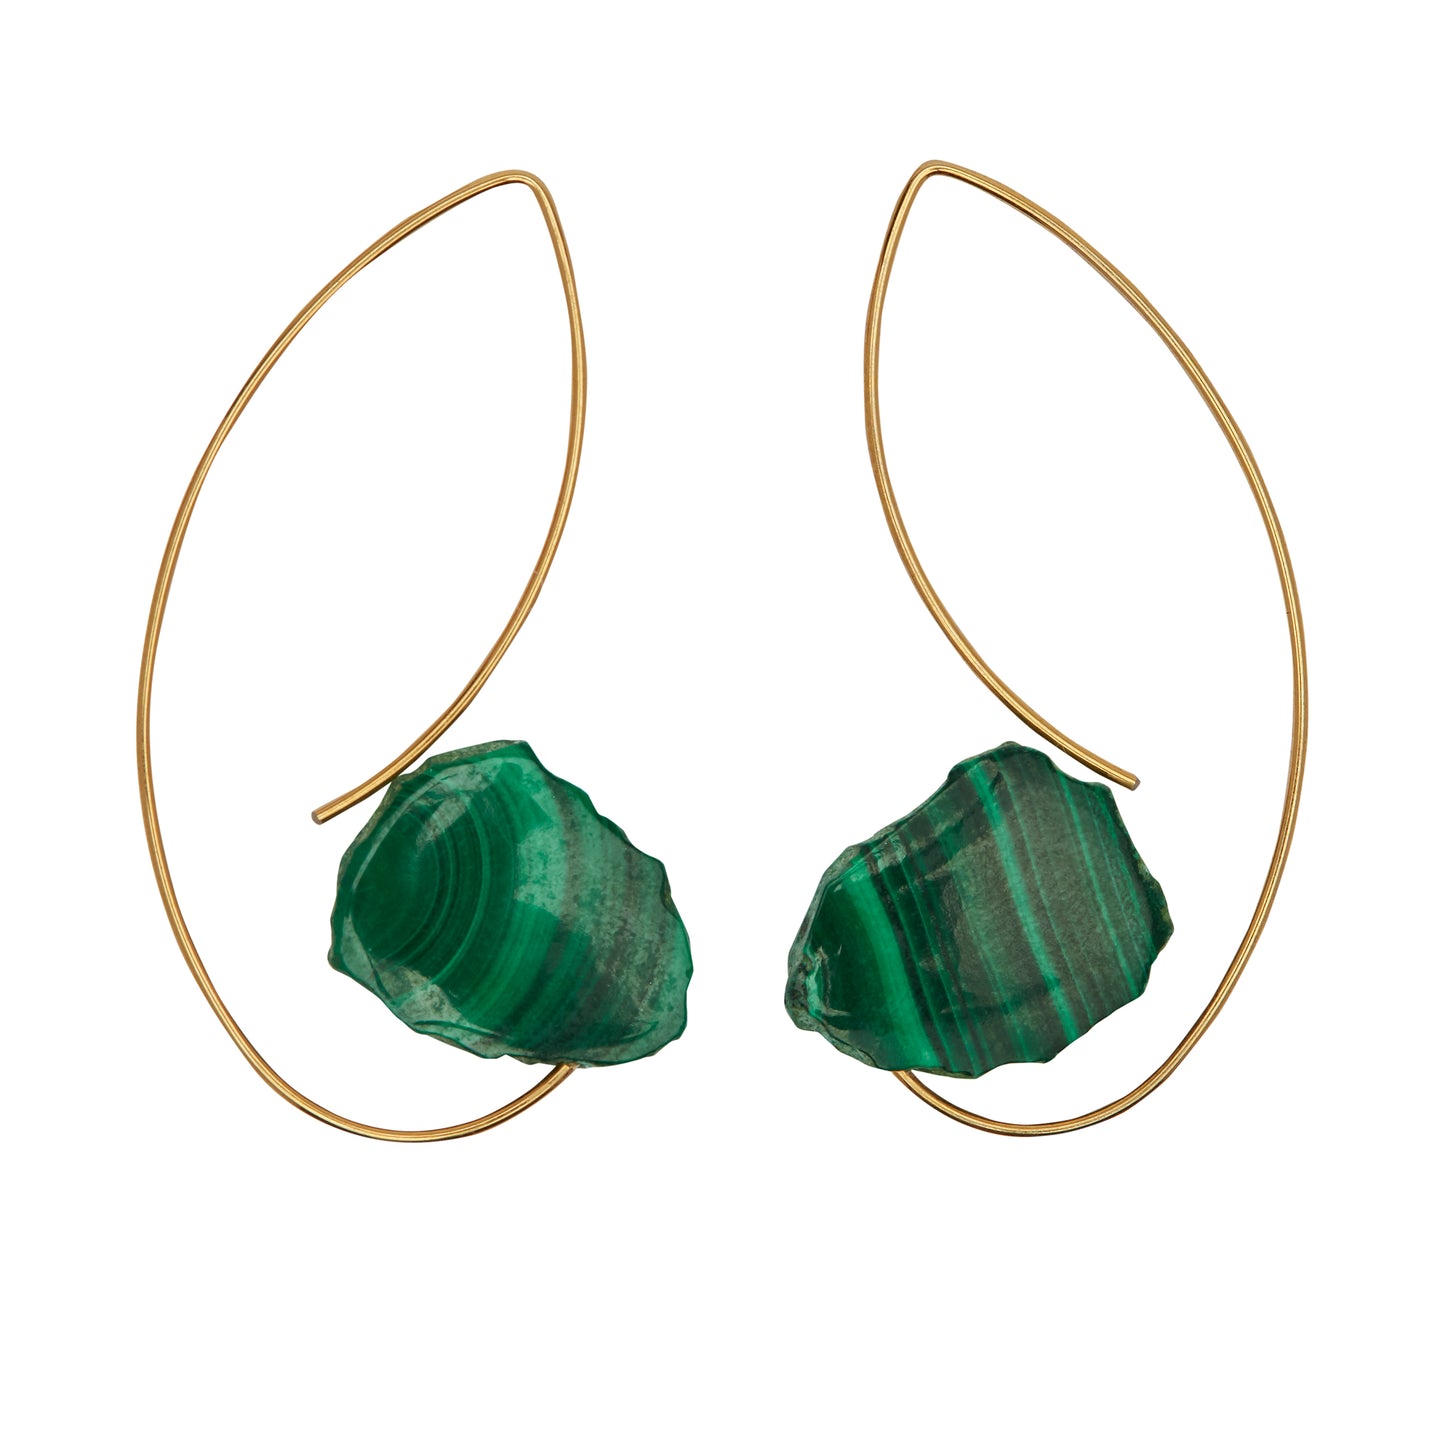 Angled Curve Earrings with Malachite